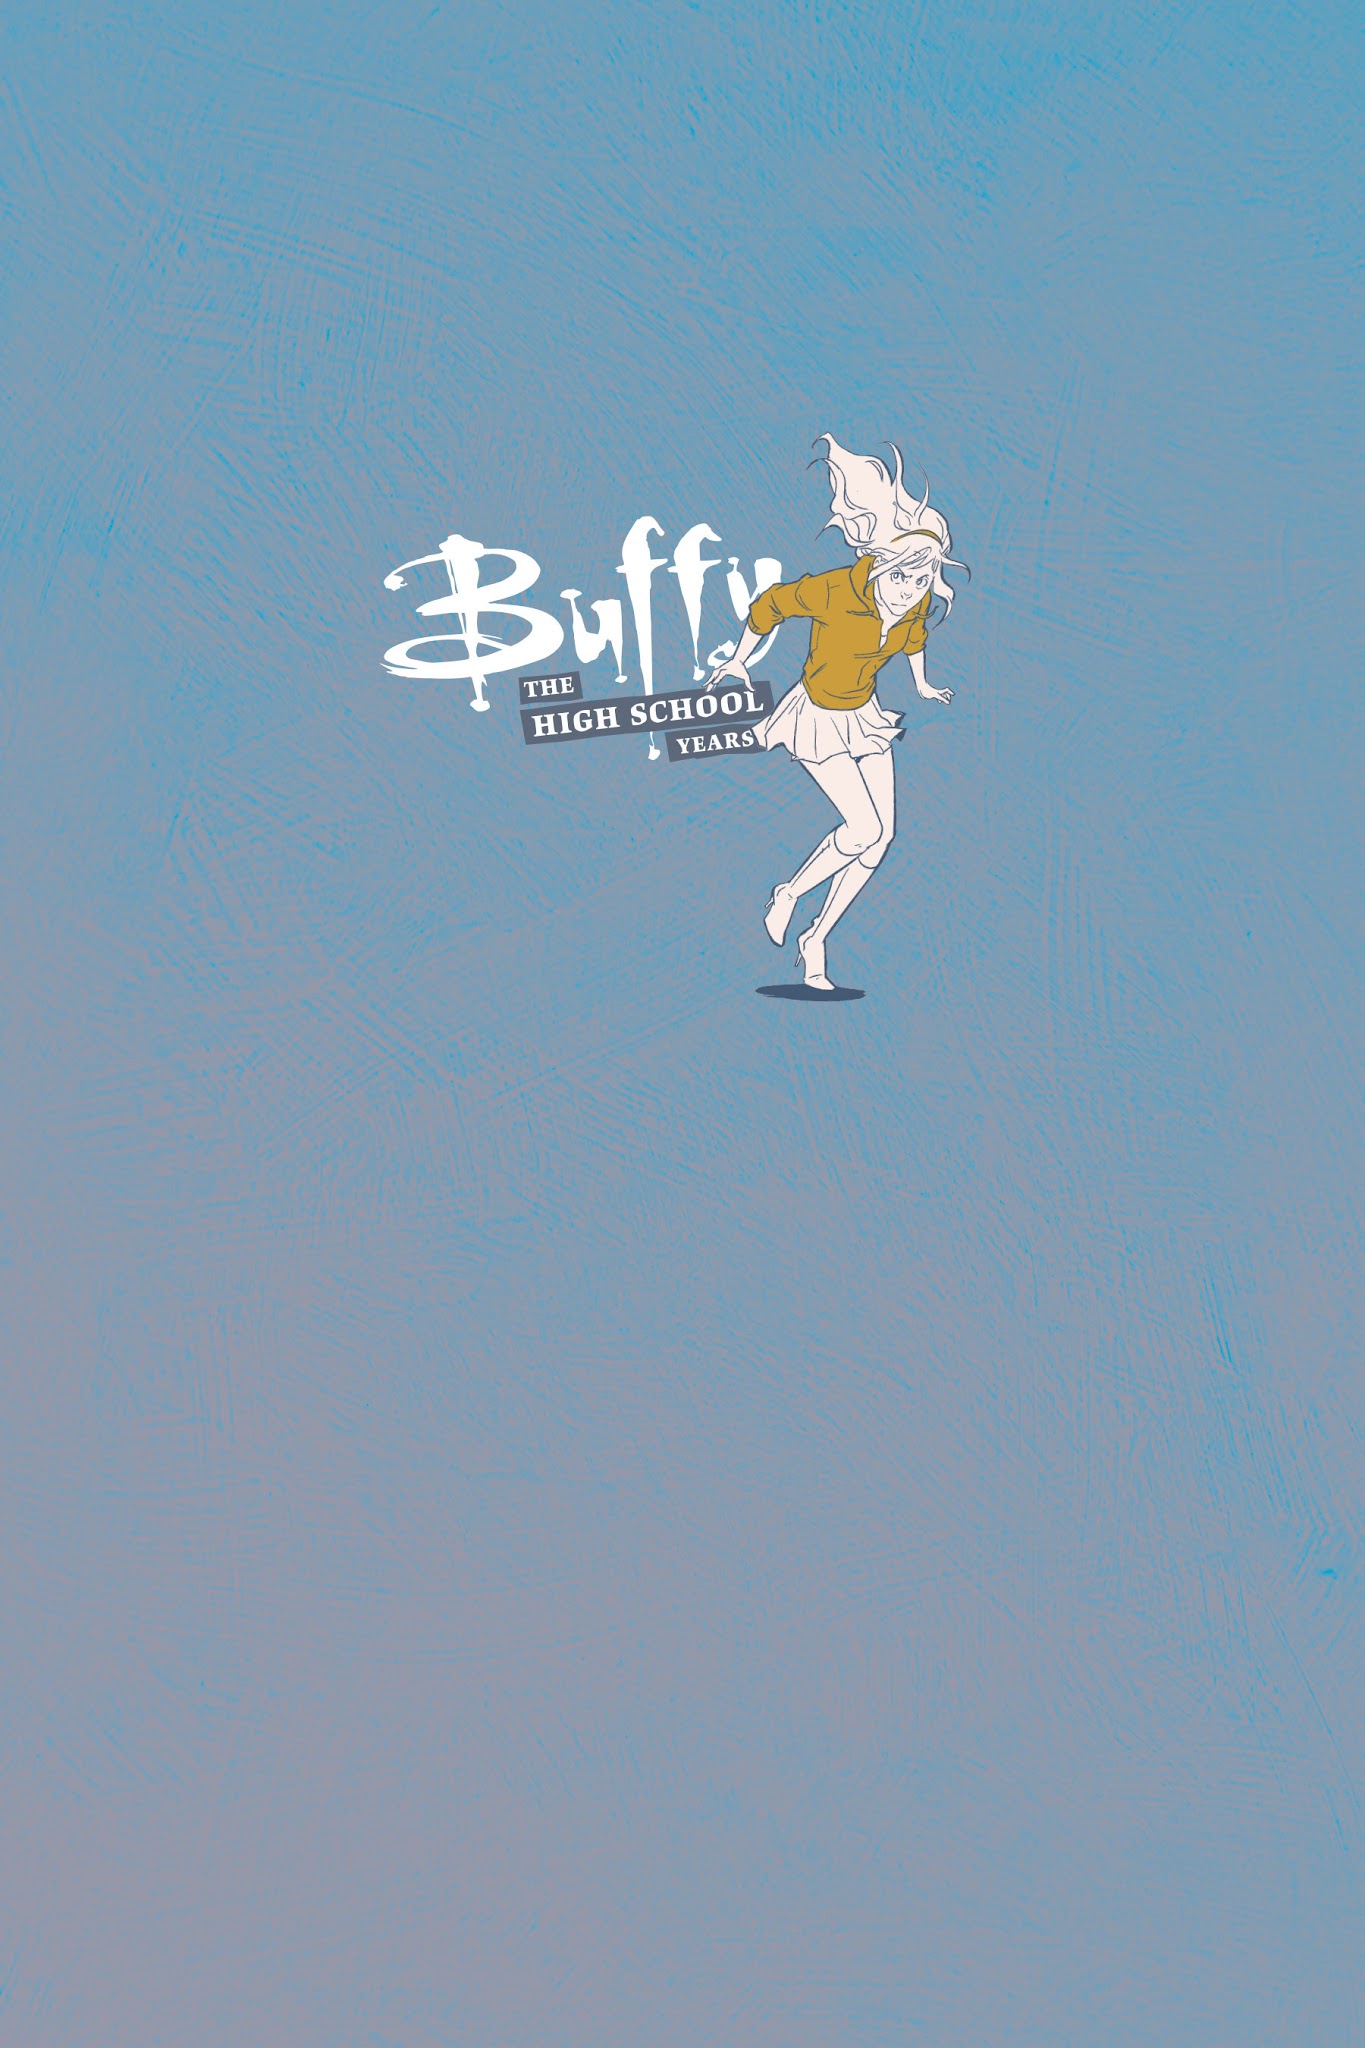 Read online Buffy: The High School Years comic -  Issue # TPB 1 - 7